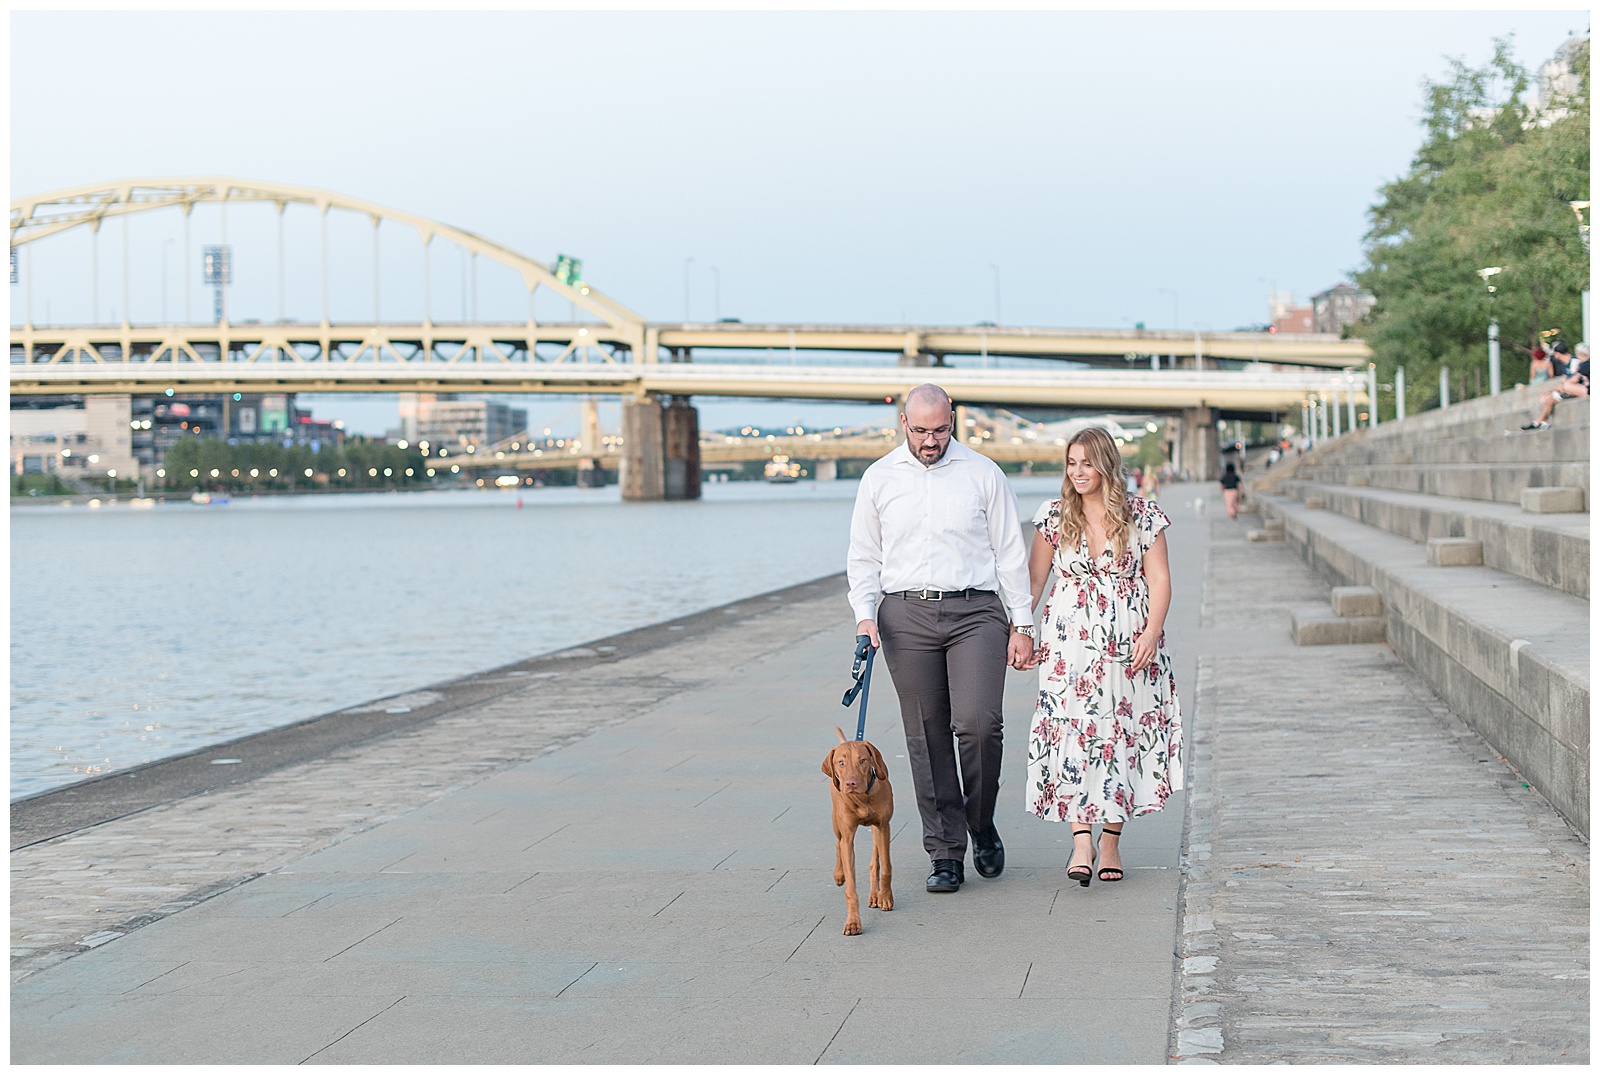 the couple is walking along the river on the concrete walkway towards the camera with the bridge and river behind them as the guy is on the left holding the dog's leash and the dog is walking ahead of the couple and the girl is on the right and the couple is holding hands and looking down towards the dog in downtown Pittsburgh